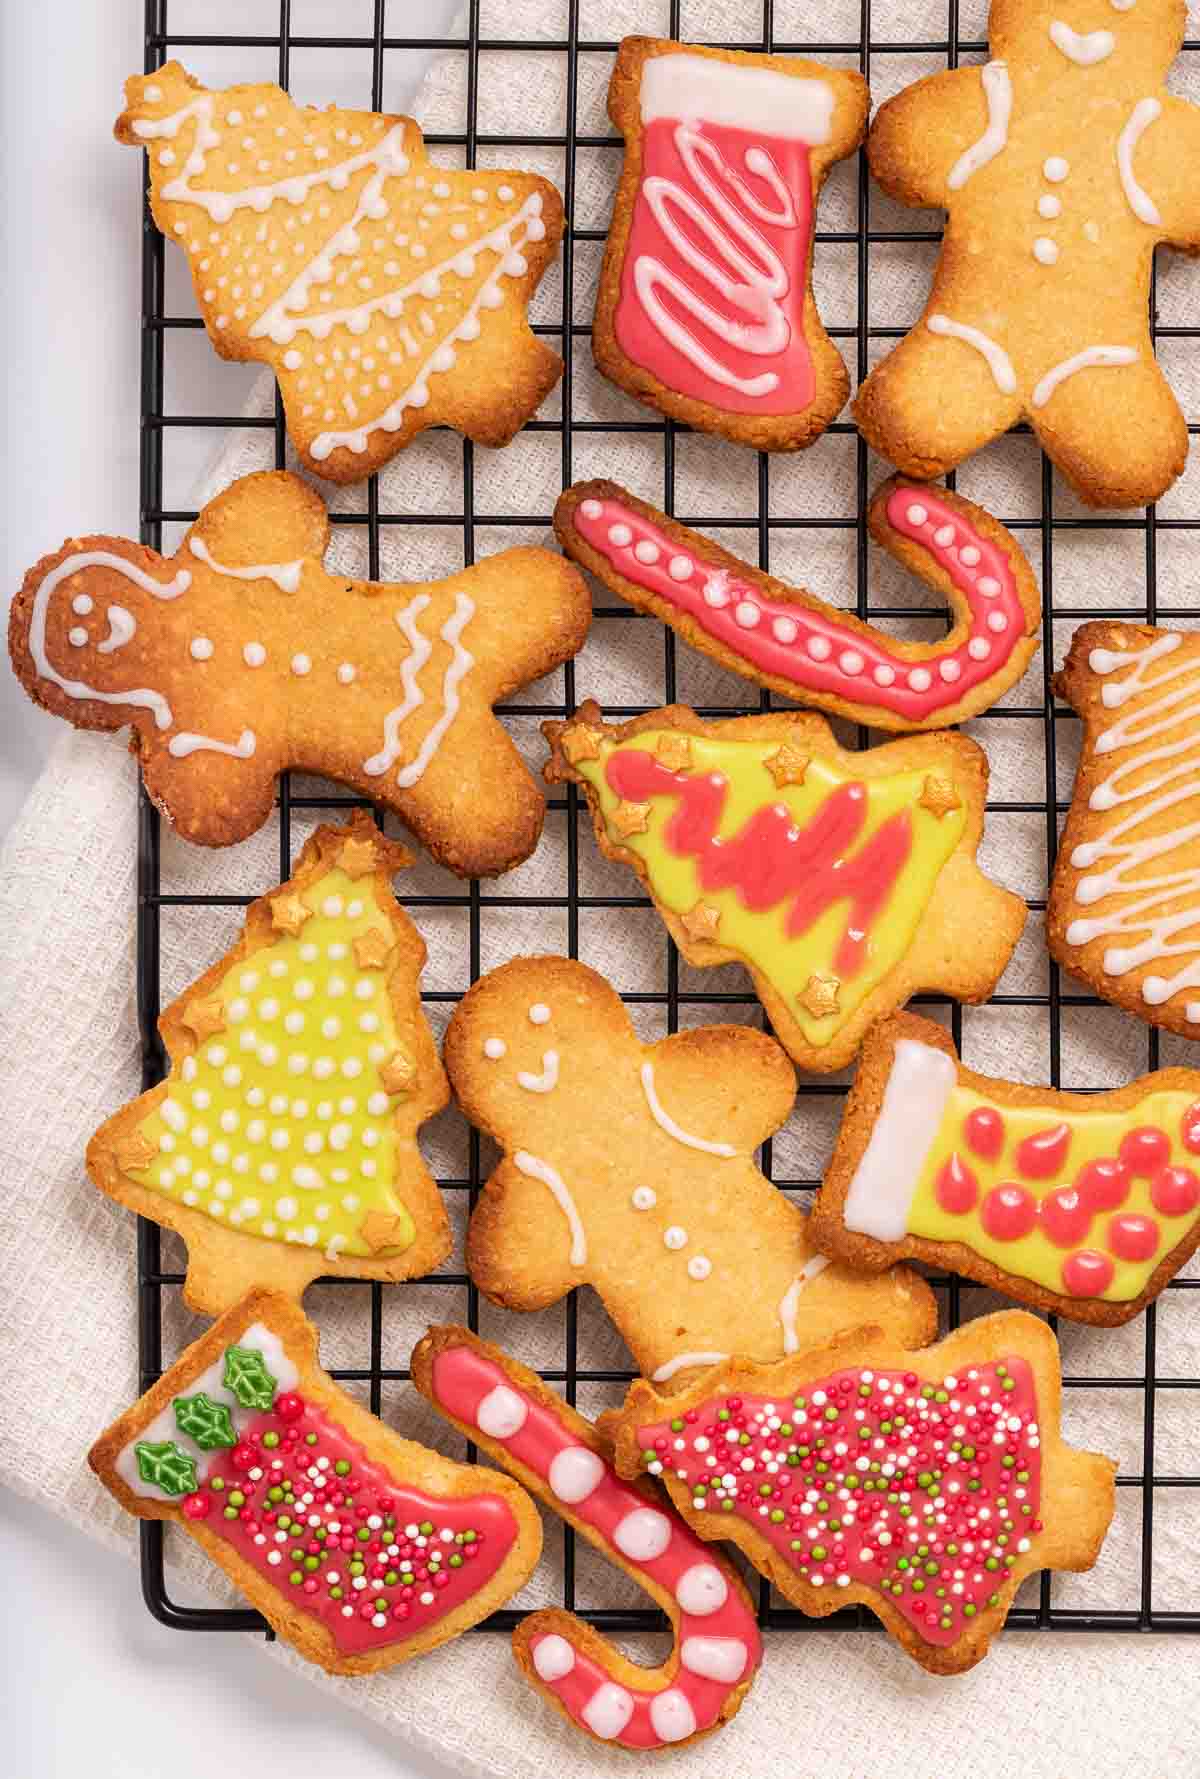 A plate of iced and decorated keto Christmas cookies.